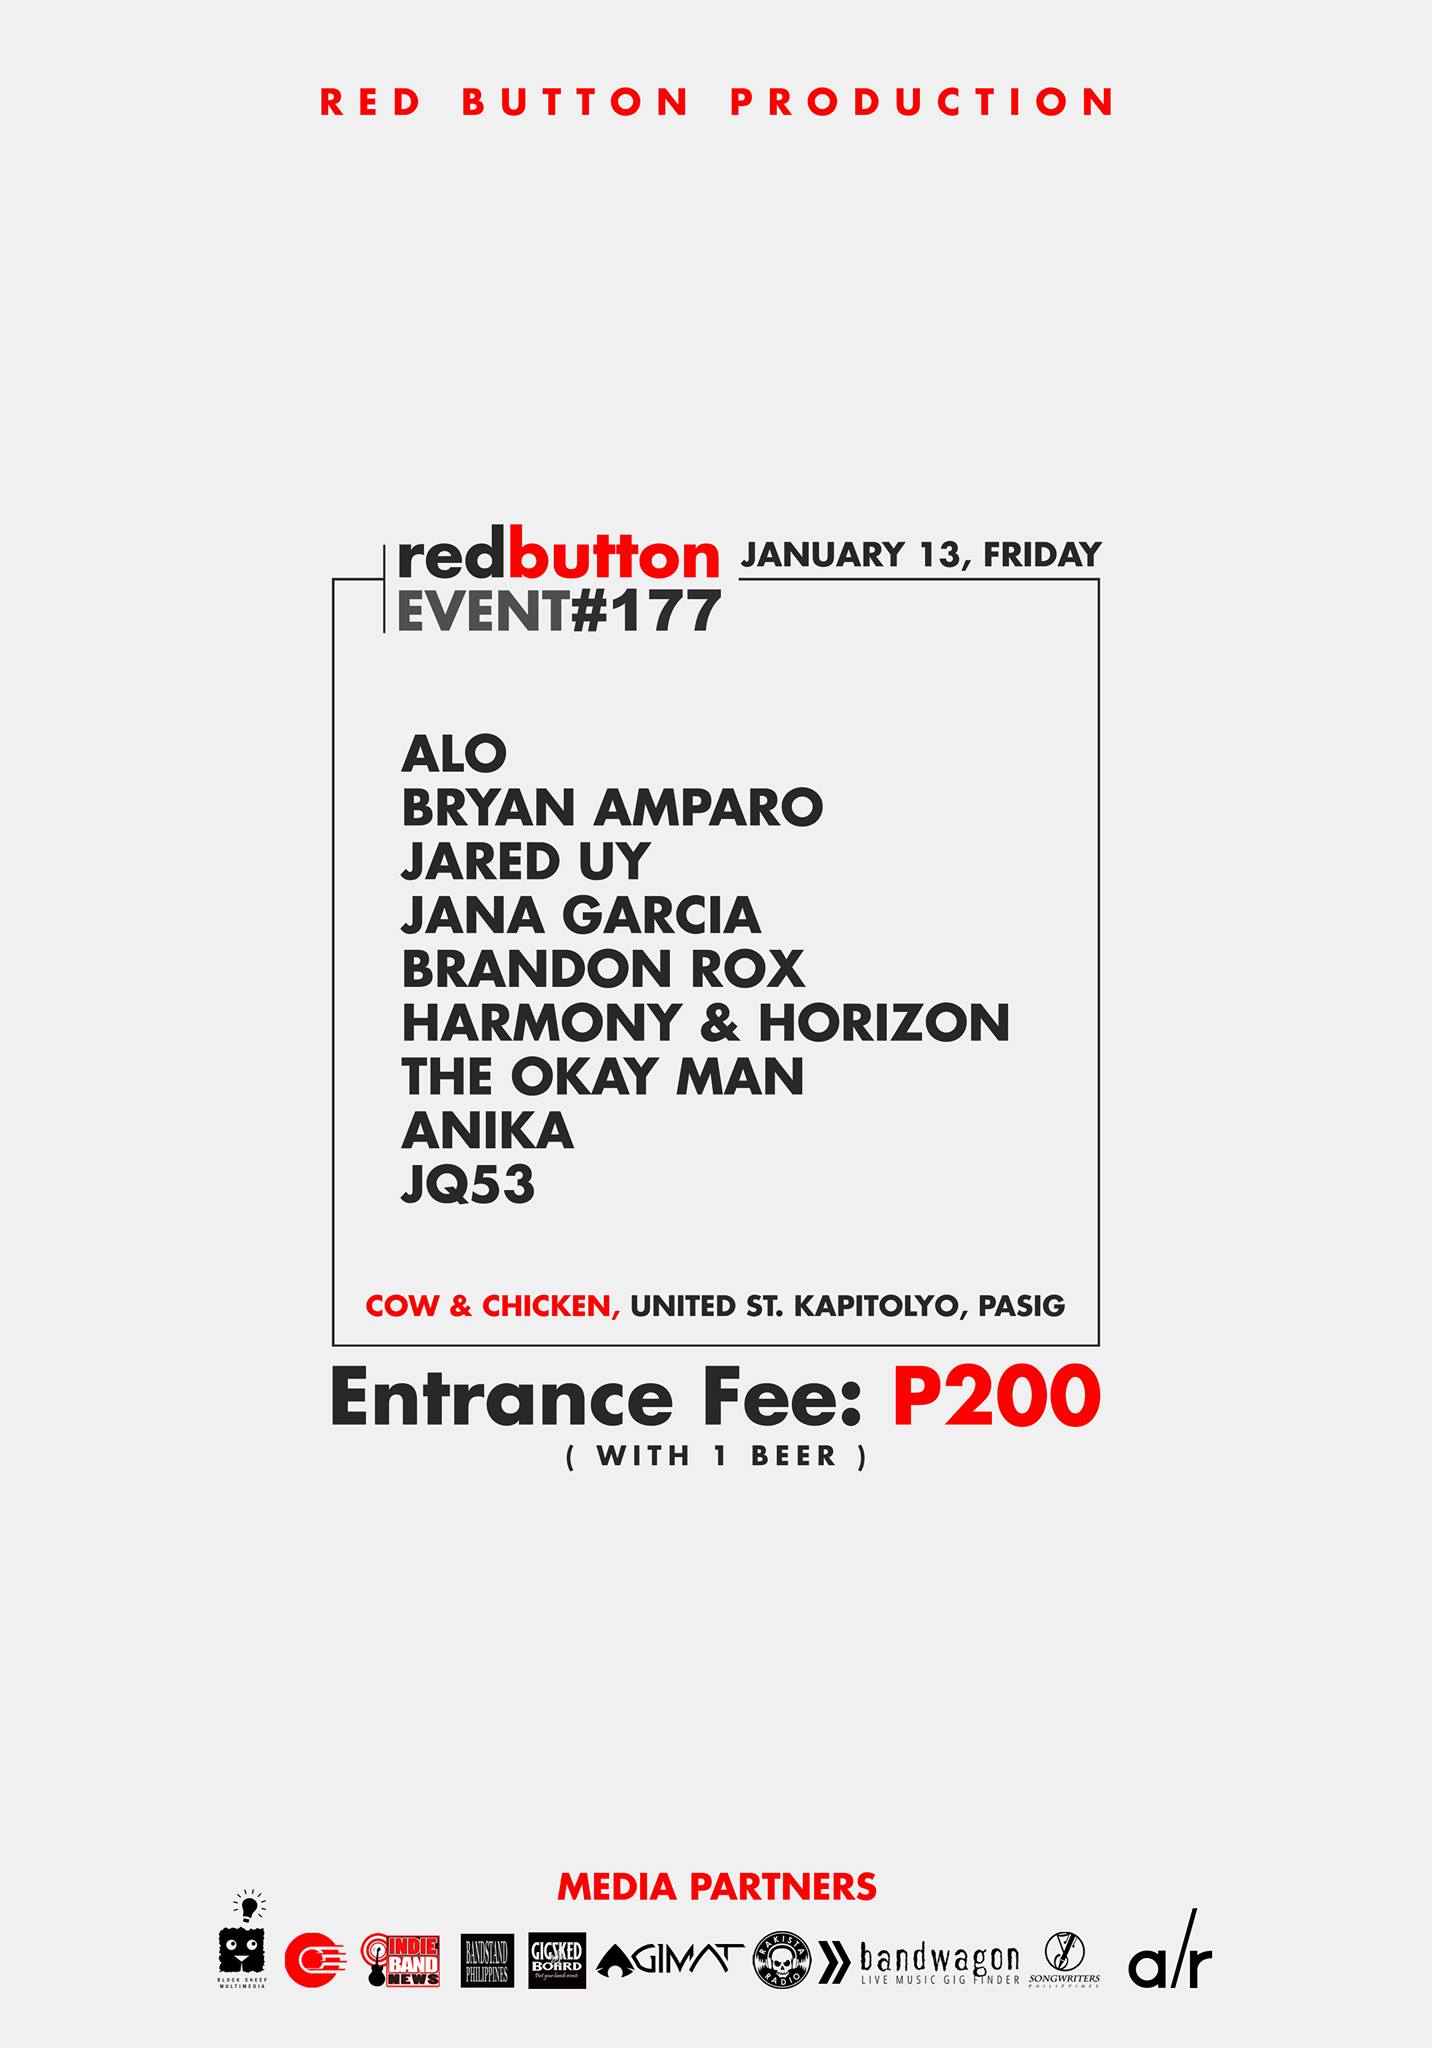 Red Button Production Page Liked · 16 hrs · Red Button Production present Red Button Event #177 January 13, Friday | 7:00PM at Cow & Chicken Modern Brunch Dining United St. Kapitolyo Pasig City Entrance Fee: P200 with 1 Beer performances by: Alo Miranda Bryan Amparo Music Jared Uy Jana Garcia Brandon Rox Harmony & Horizon The Okay Man Anika JQ53 Invitation Link: https://www.facebook.com/events/242673672826922/ Media Partners: Block Sheep Multimedia Indie Band News Bandstand Philippines Gig Sked Board Agimat: Sining at Kulturang Pinoy Rakista Radio! Bandwagon Songwriters Philippines Adobo Radio — at Cow & Chicken Modern Brunch Dining.